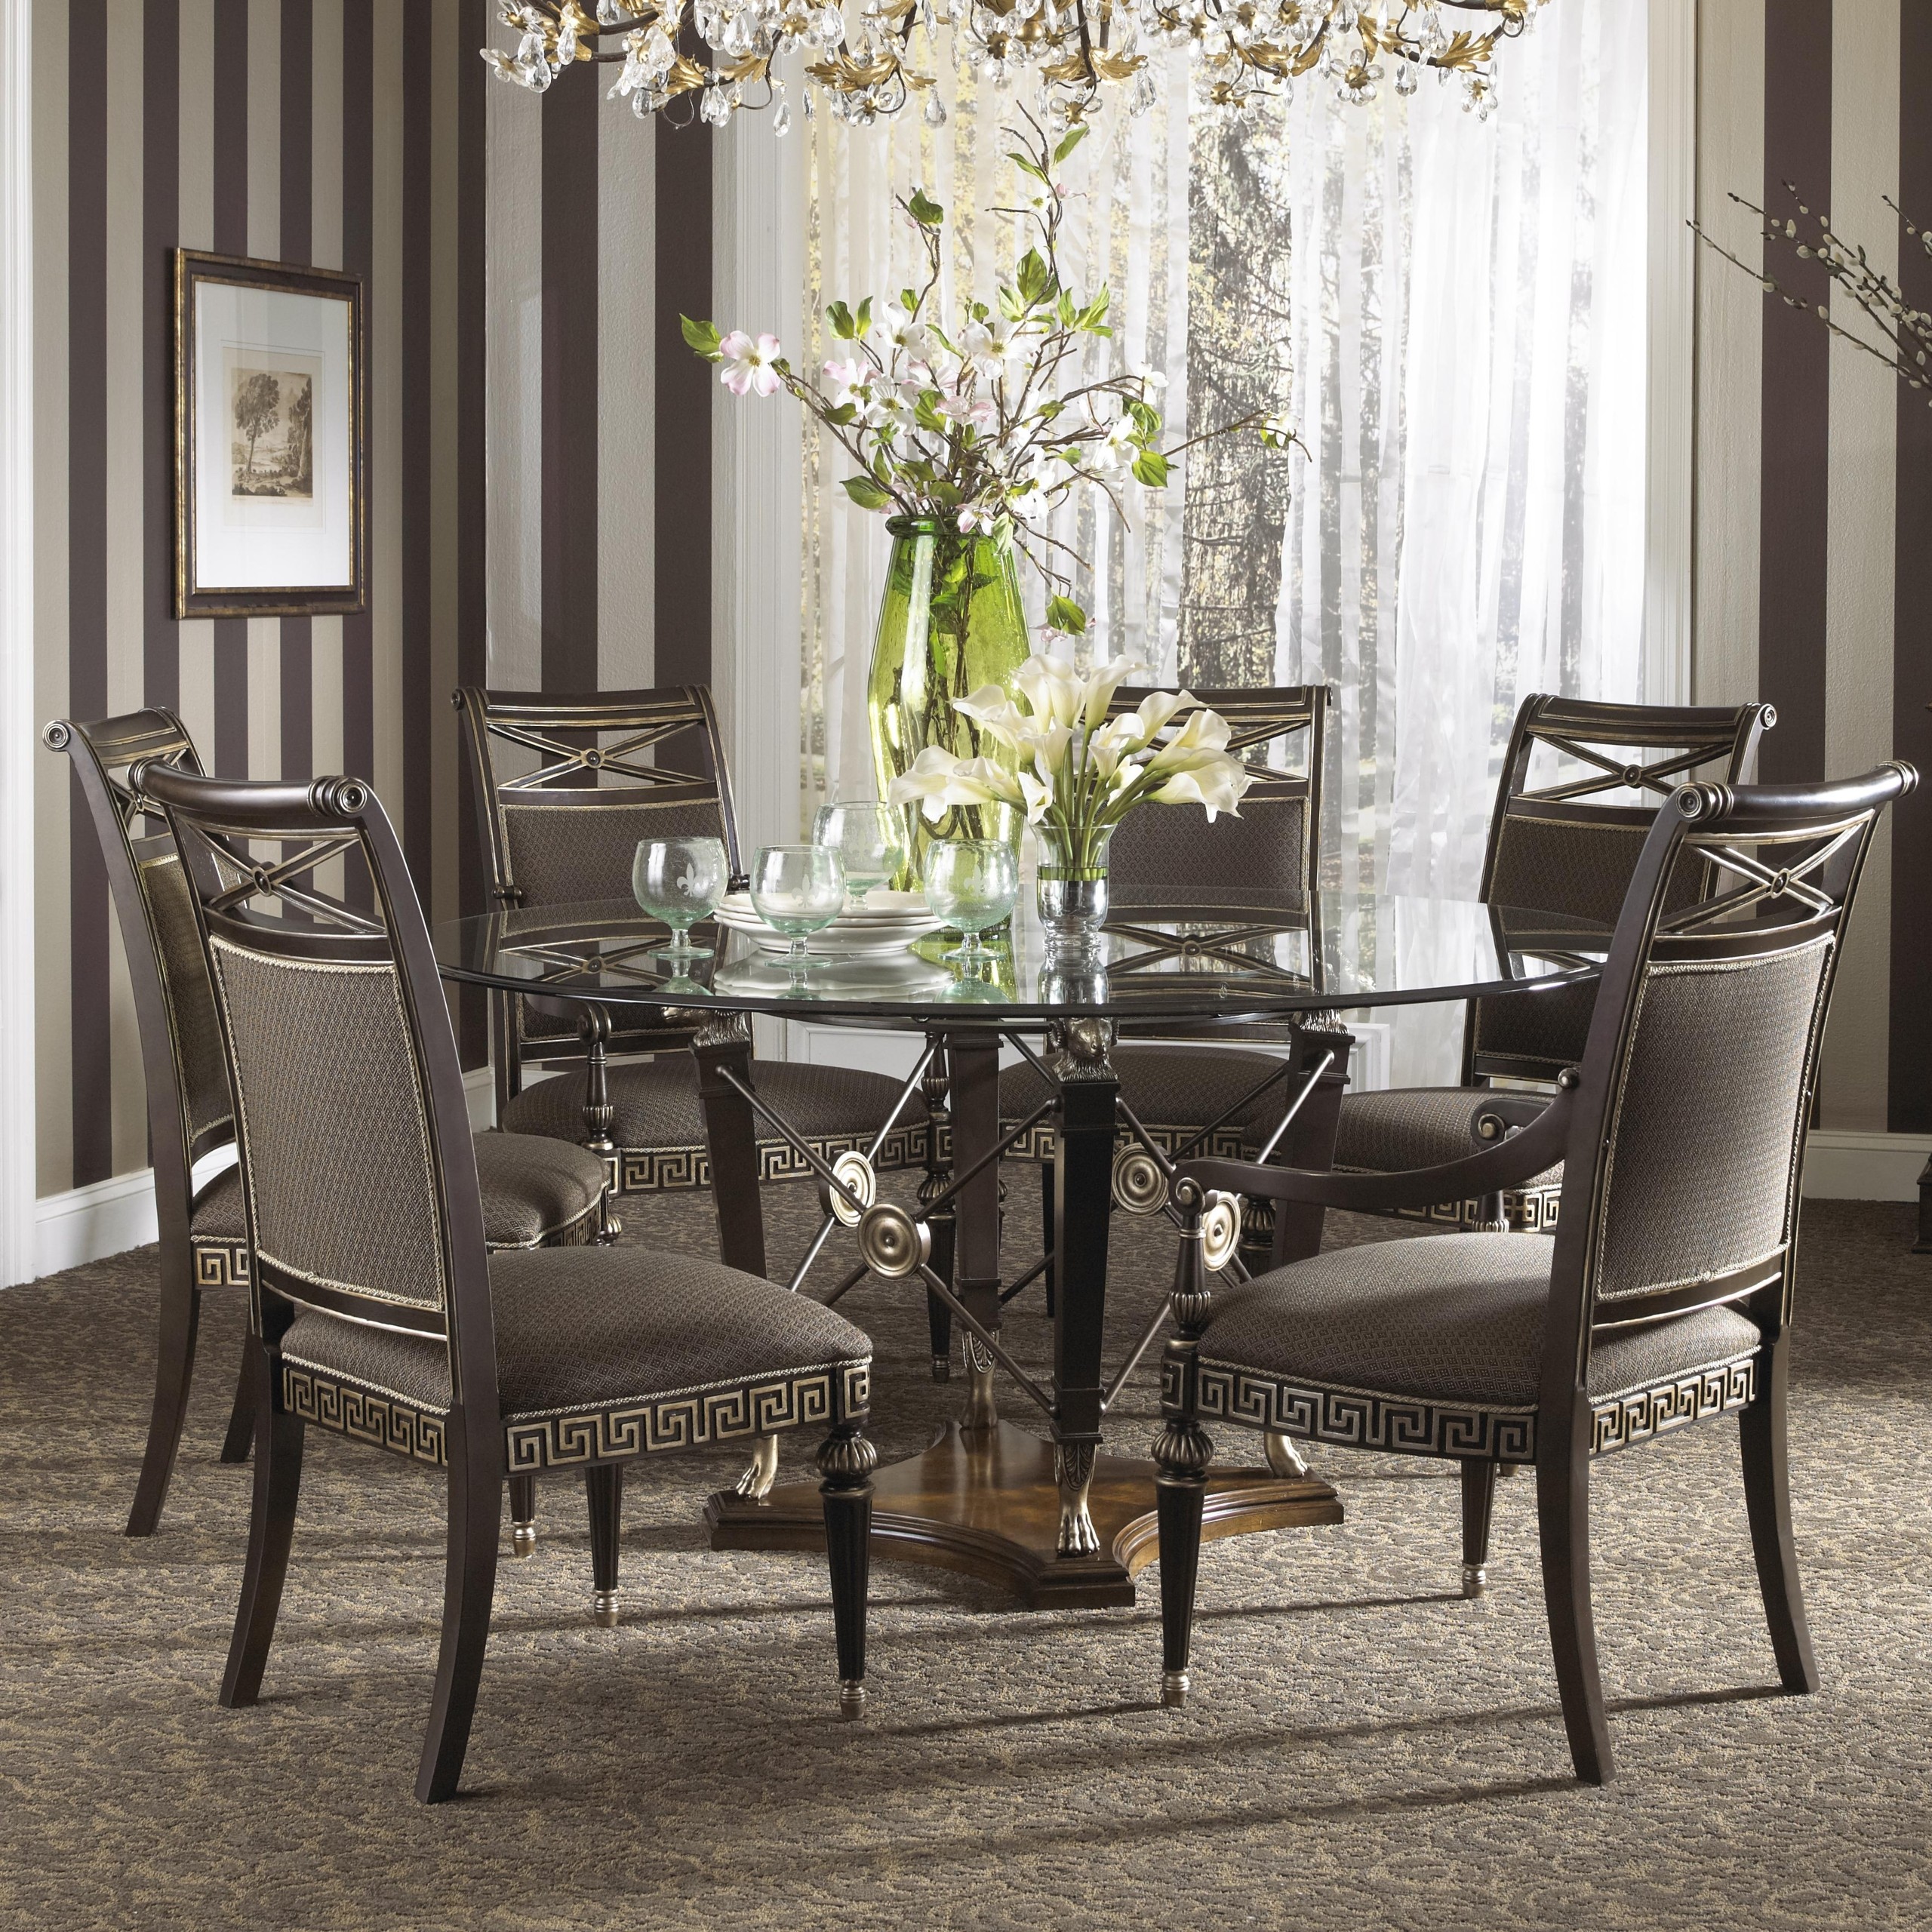 Round Glass Top Dining Room Table - Ideas on Foter